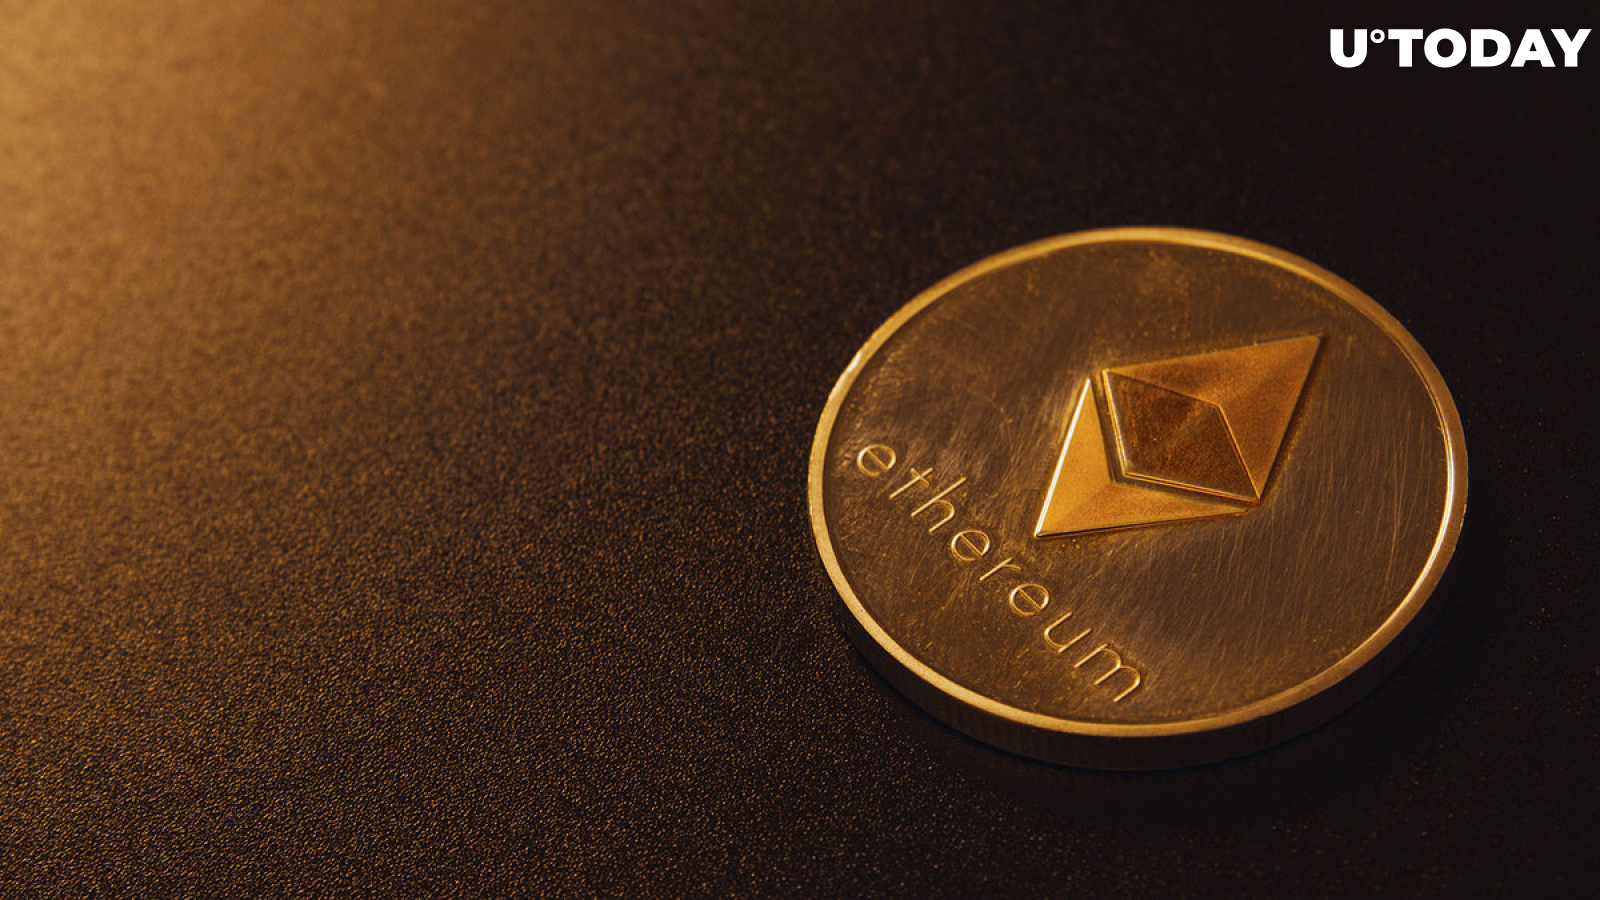 Institutional and CEX Ethereum (ETH) Staking in Asia Suddenly Spike: Report